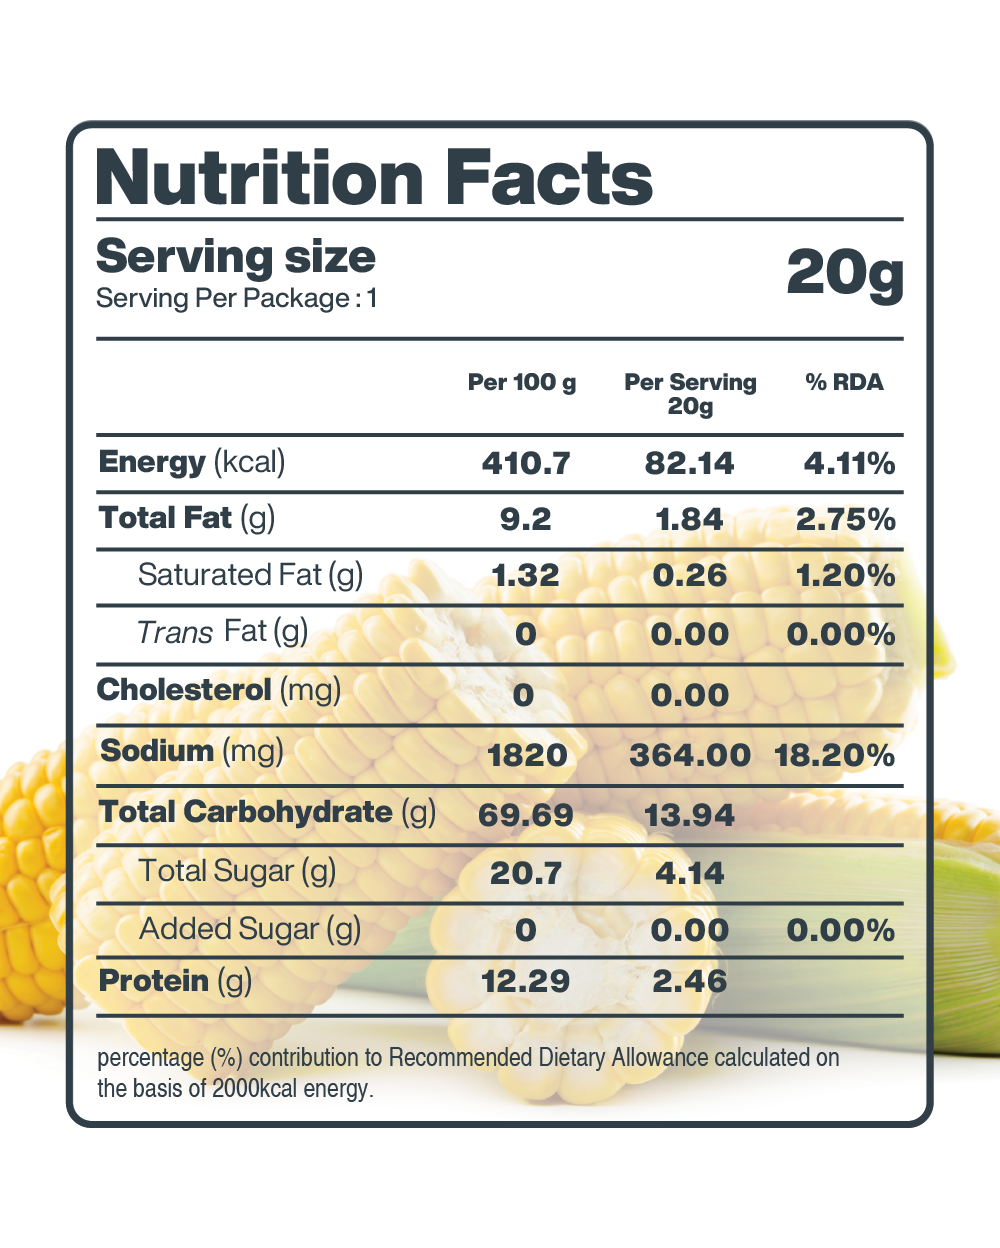 Nutrition facts for Freeze Dried Crispy Corn Gourmet Cheese by MOONFREEZE FOODS PRIVATE LIMITED, perfect for gourmet snacking.